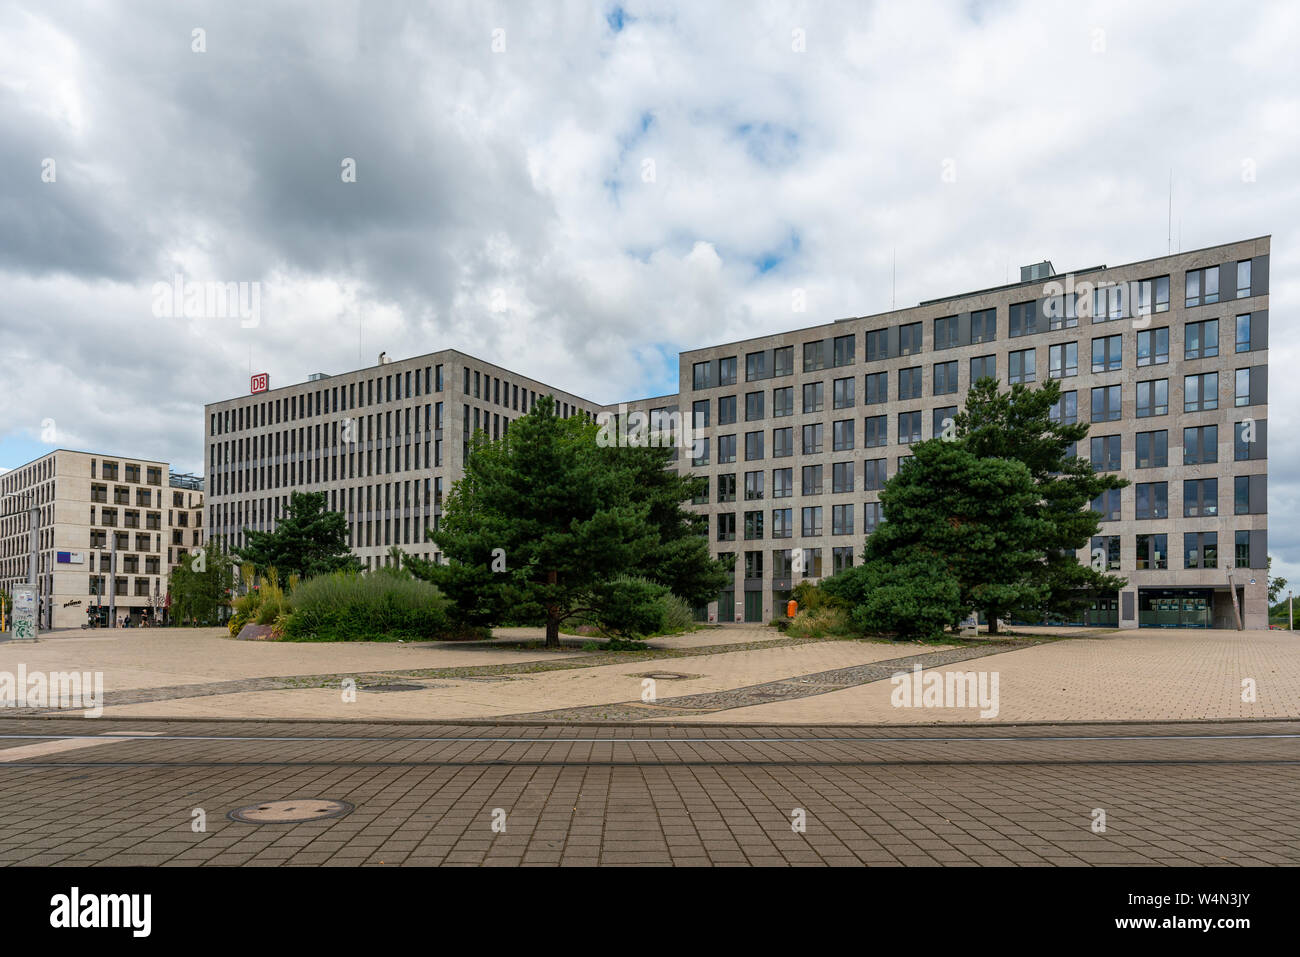 Elisabeth-Schwarzhaupt-Platz, Berlin, Germany - july 07, 2019: facade of the Nordbahnhof Carre buildings with db sign on the roof Stock Photo